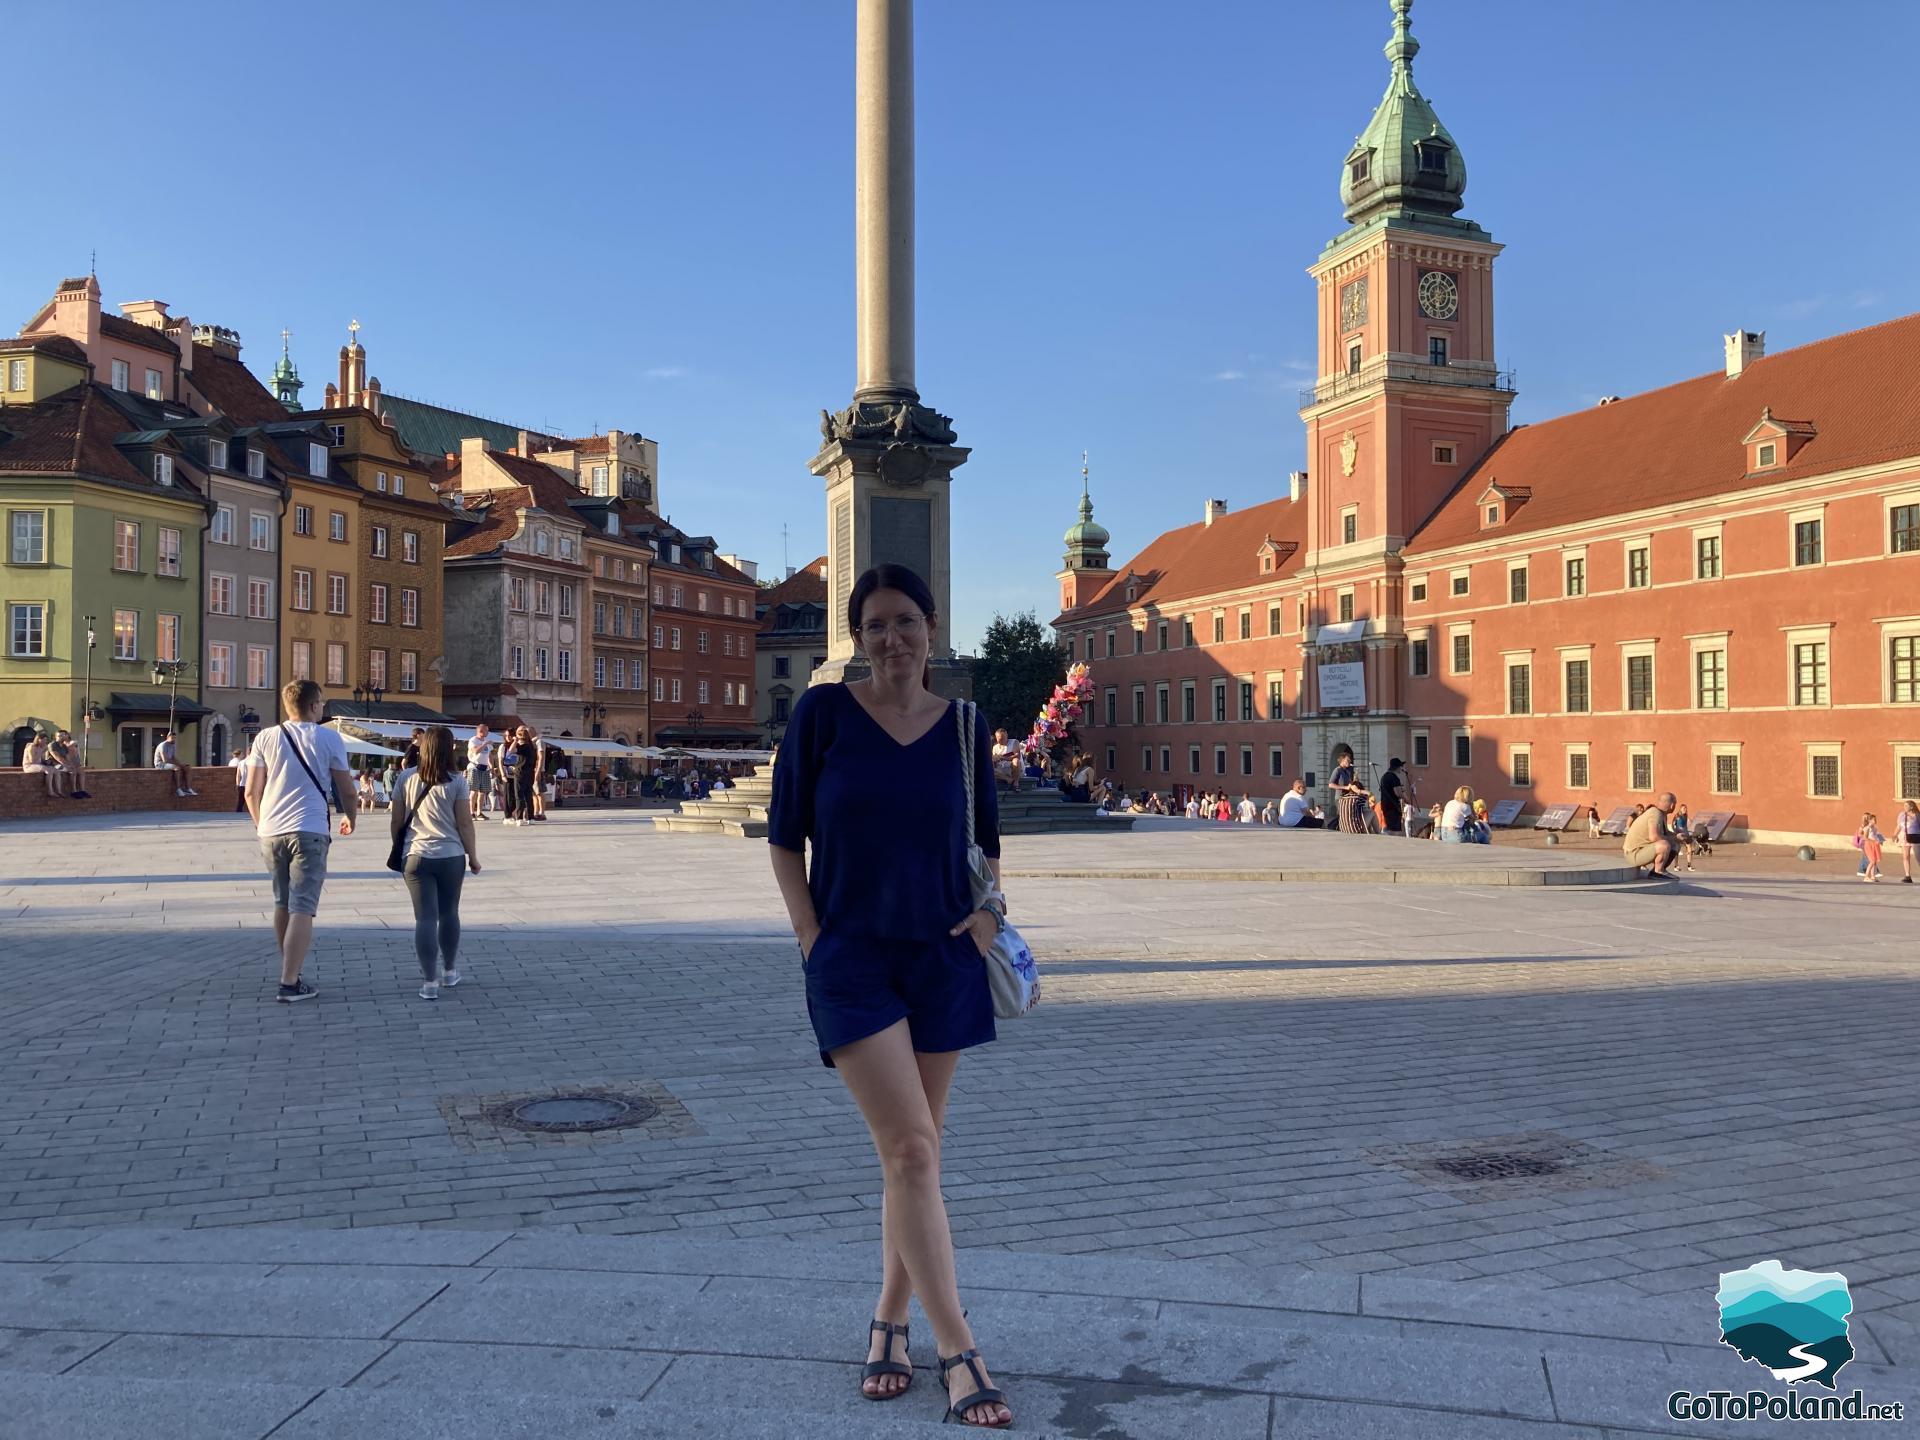 a woman is standing in the square, on the left there are colorful tenement houses, behind the woman there is a column, on the right there is a brick-red castle